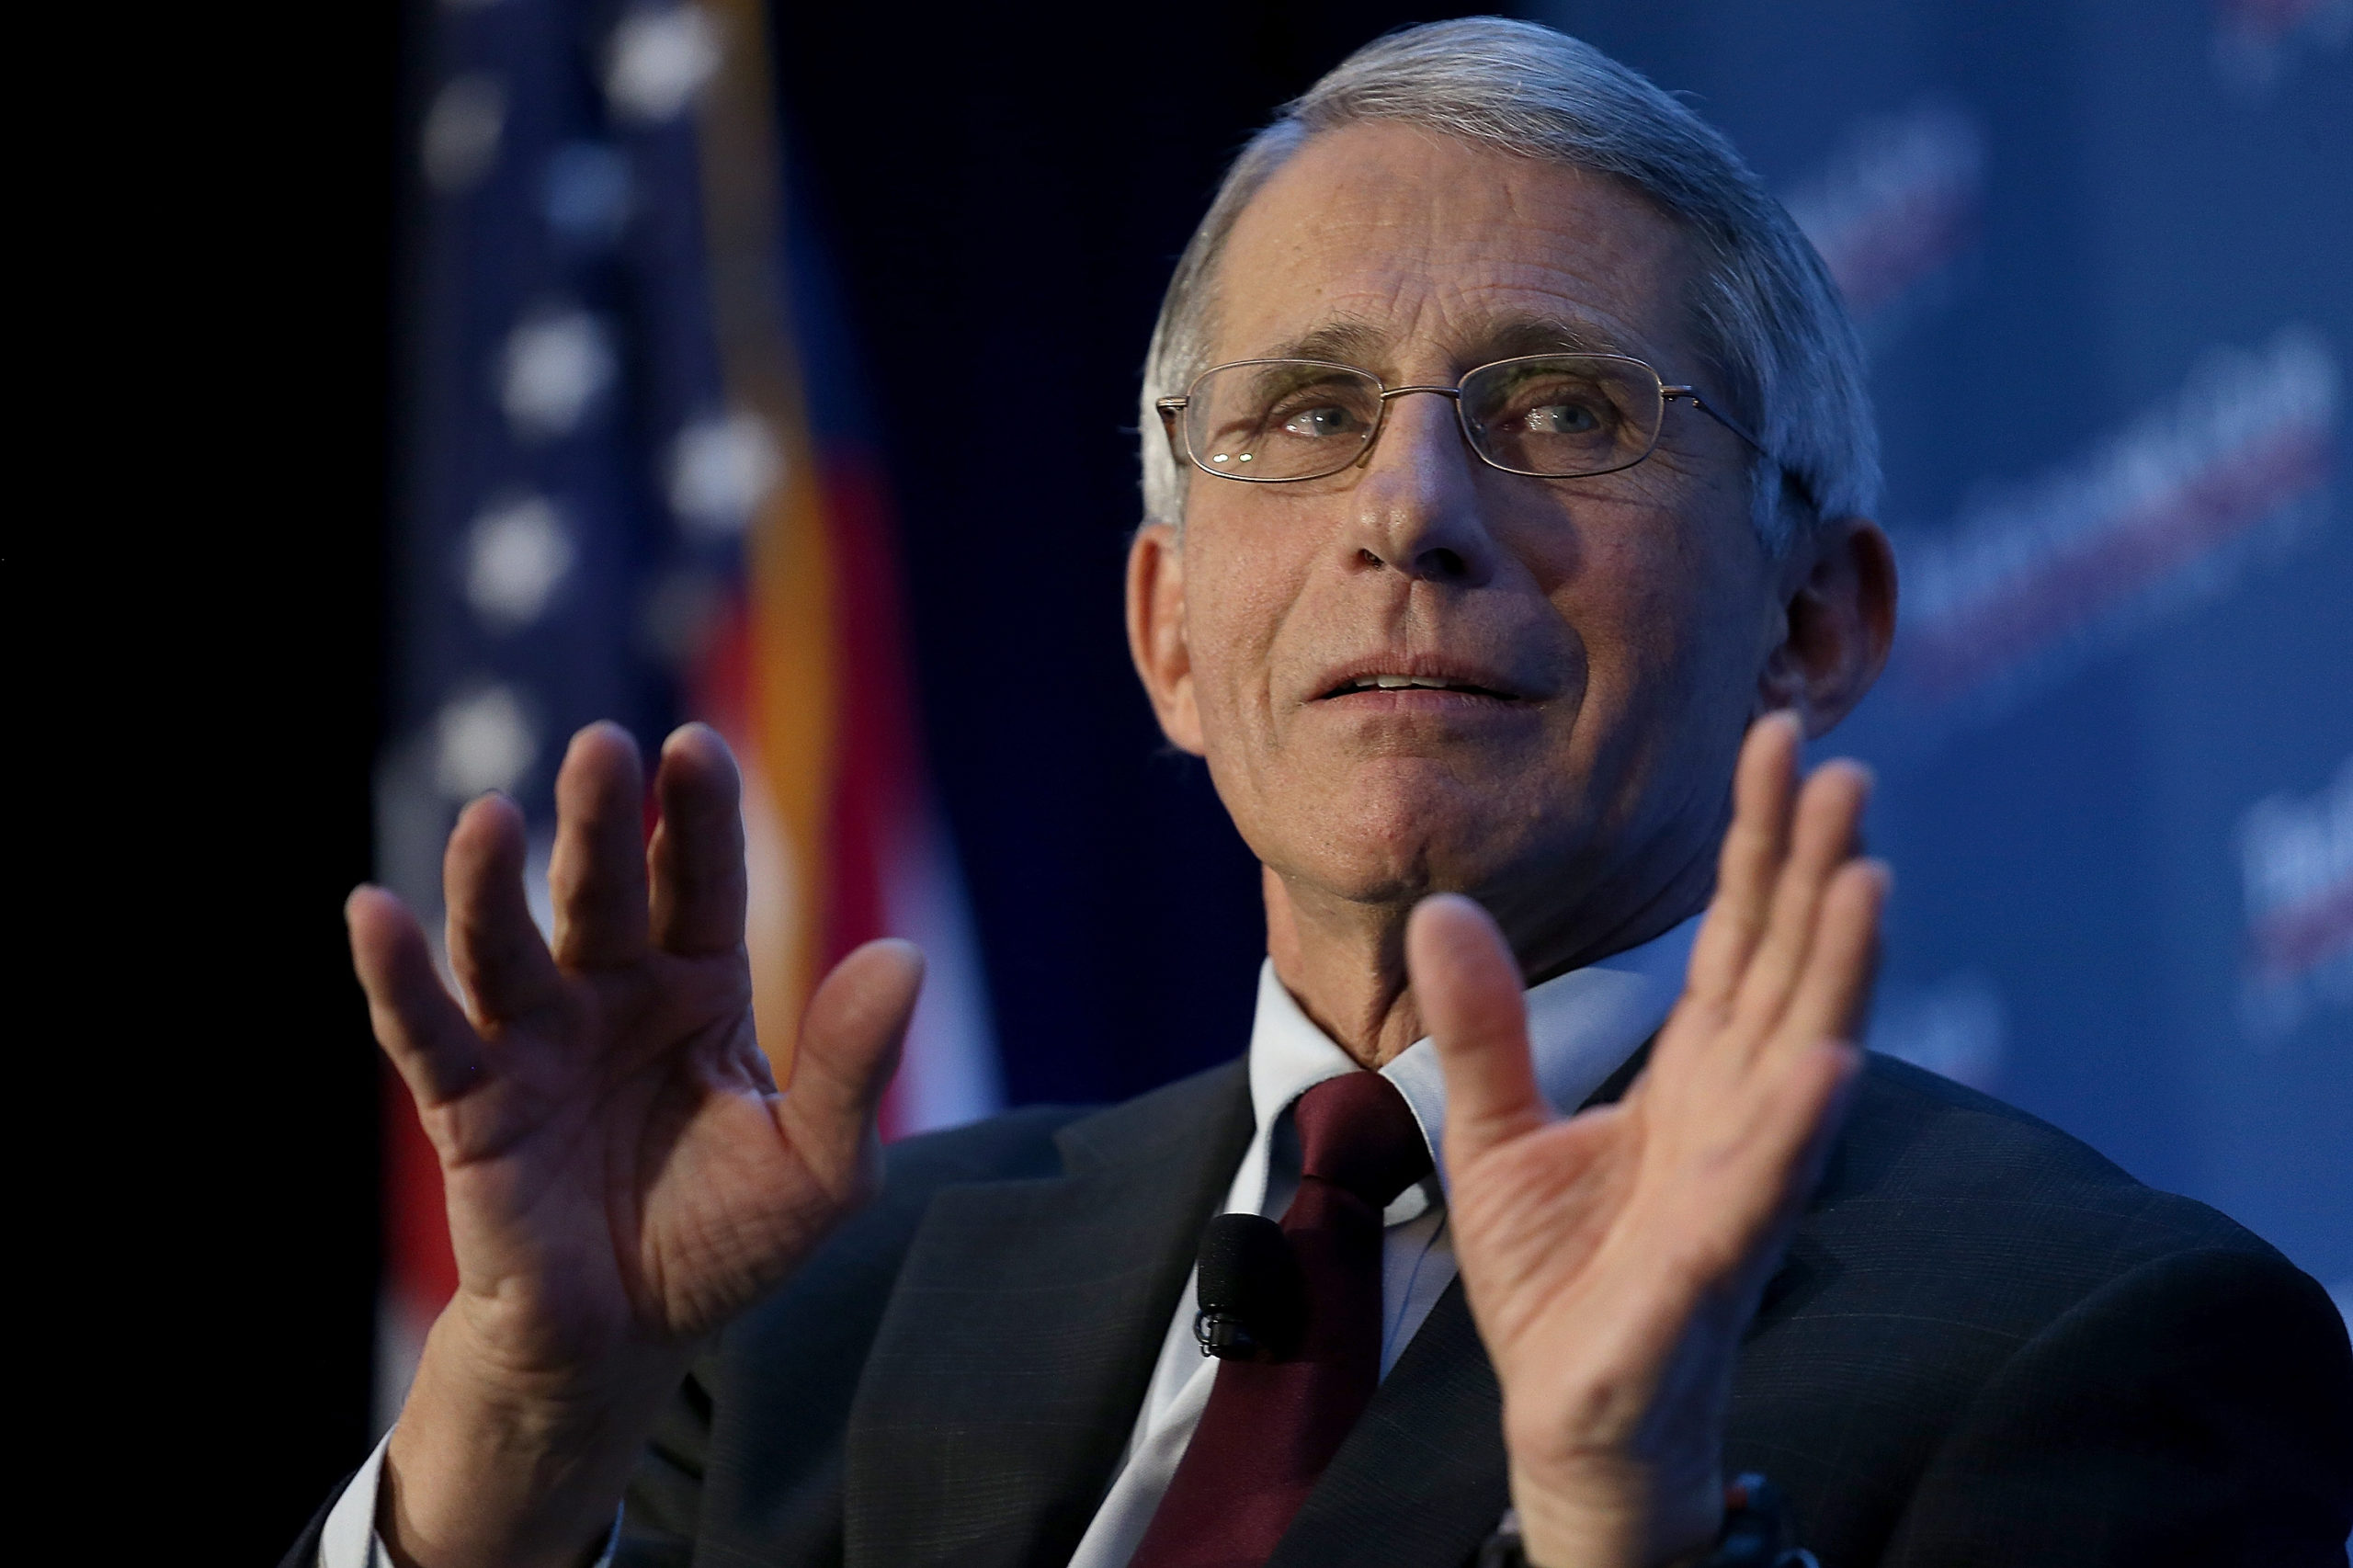 WASHINGTON, DC - JANUARY 29: Dr. Anthony Fauci, director of the National Institute of Allergy and Infectious Diseases, discusses the Zika virus during remarks before the Economic Club of Washington January 29, 2016 in Washington, DC. Fauci said that there is no indication that anyone has been bitten by a mosquito in the United States and acquired the Zika virus. (Photo by Win McNamee/Getty Images)